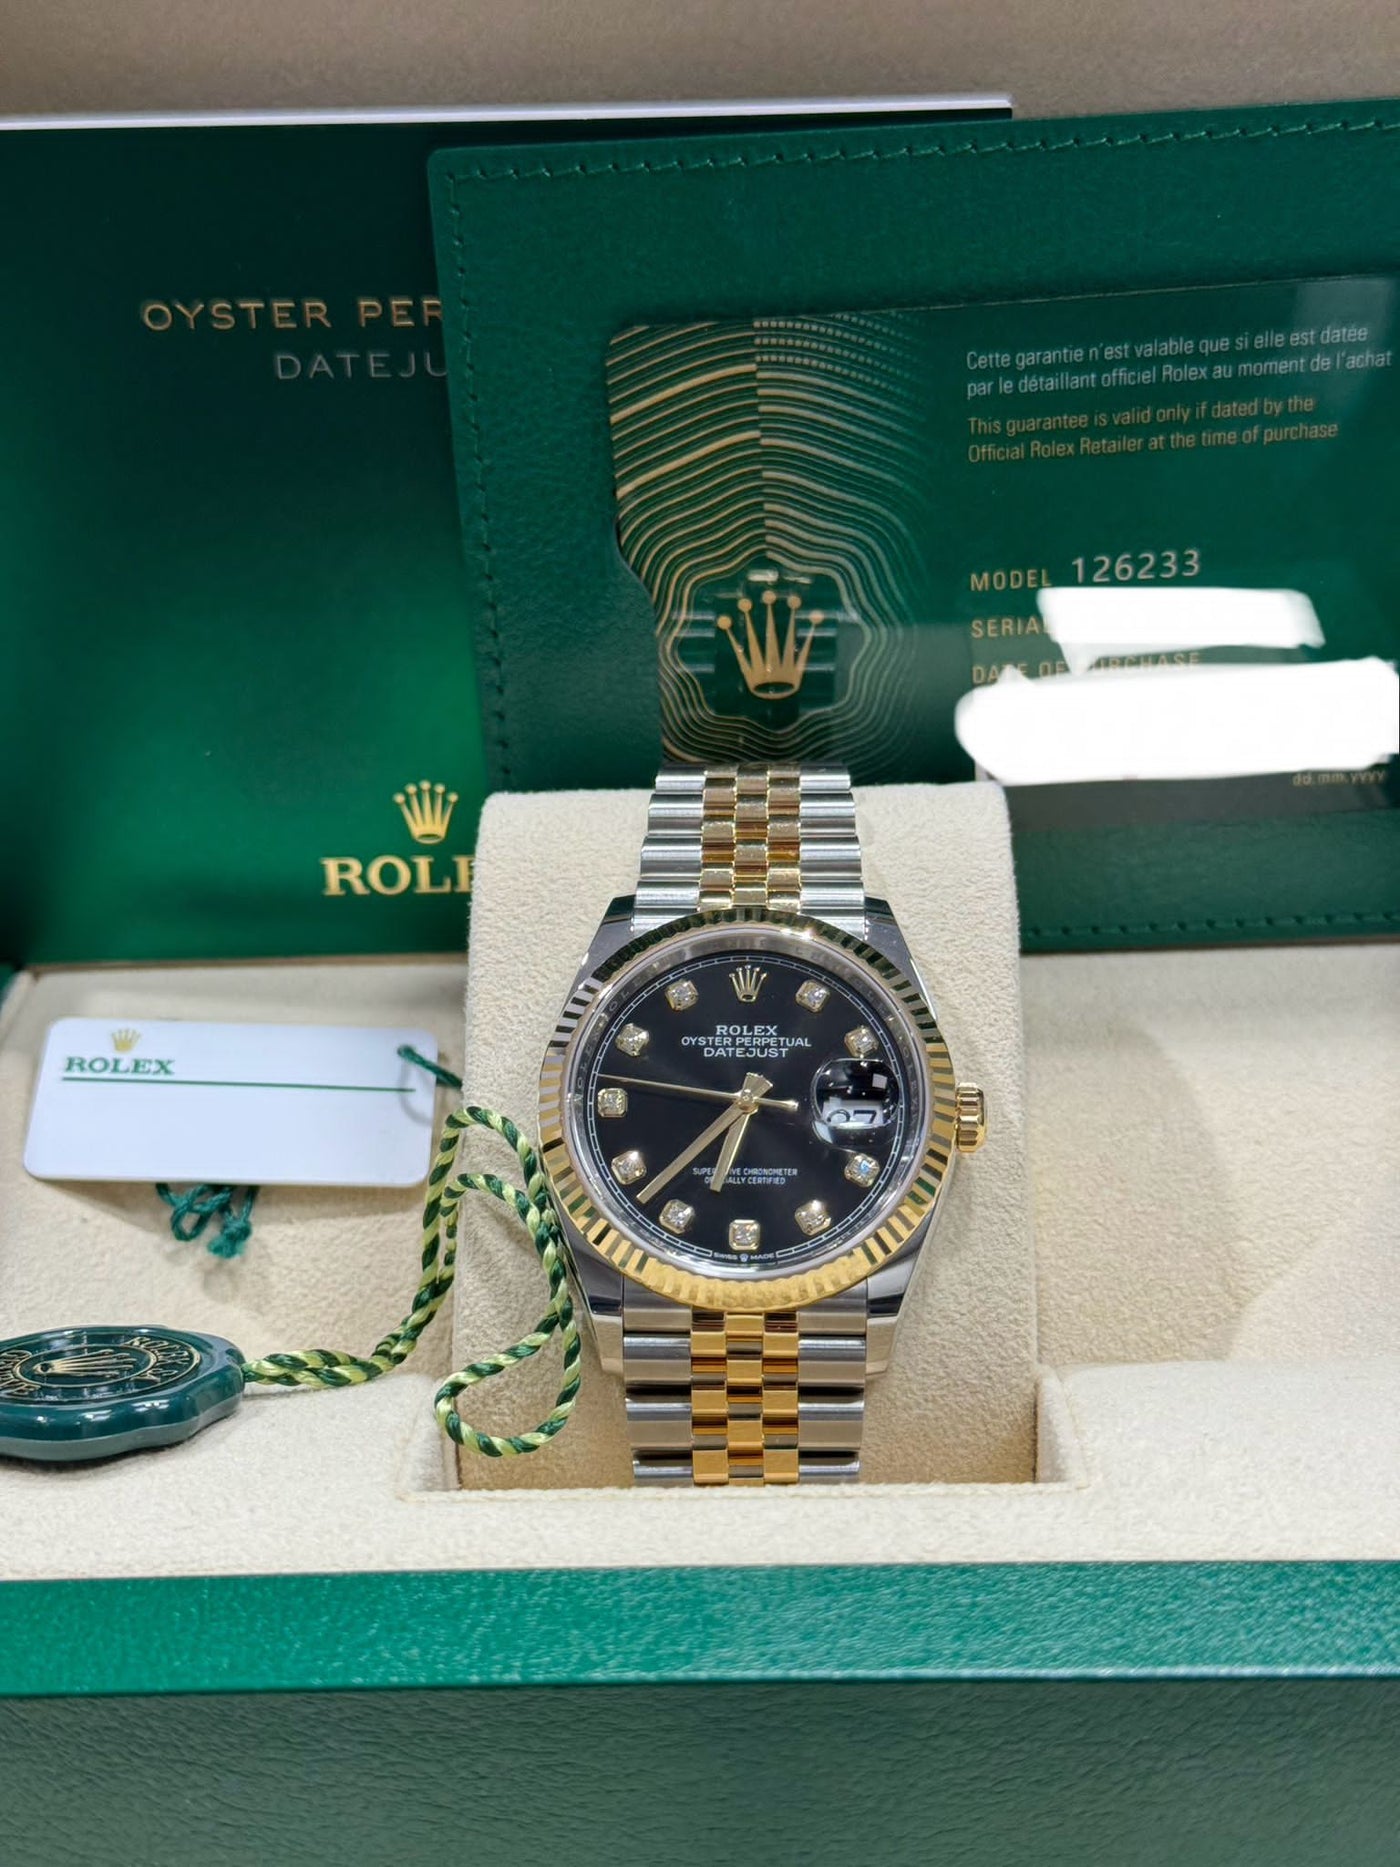 Rolex  Datejust 36, Oyster, 36 mm, Oystersteel and yellow gold,  Bright black diamond-set dial, jubilee bracelet,  126233